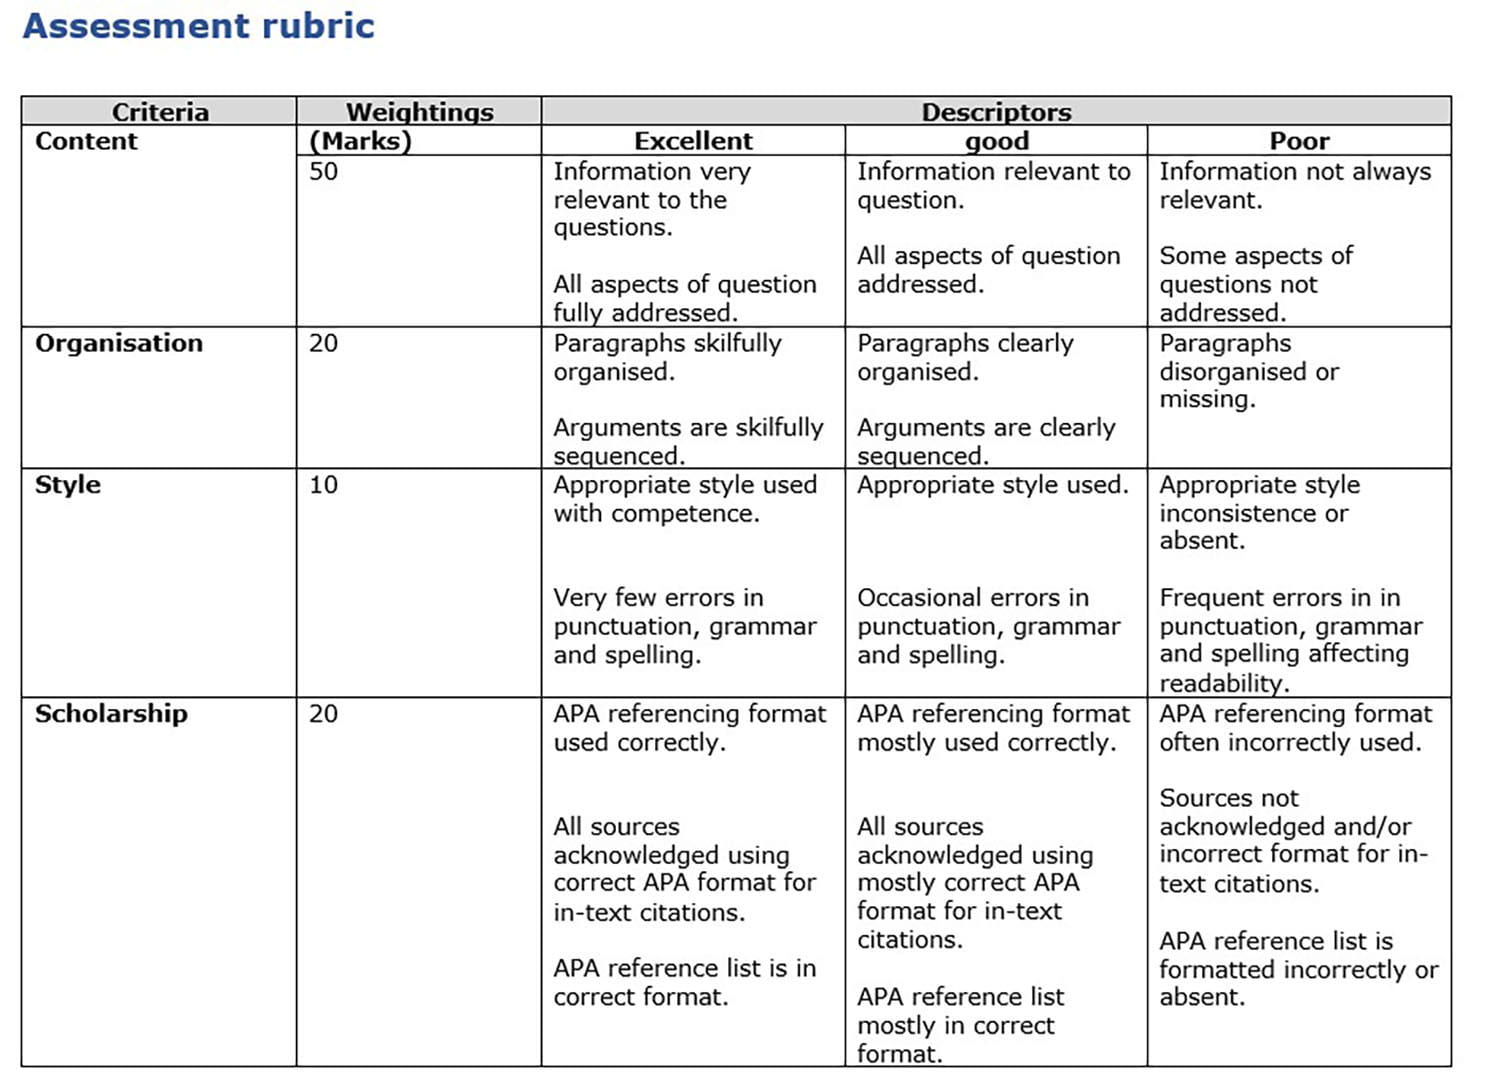 example grading rubrics for writing assignments